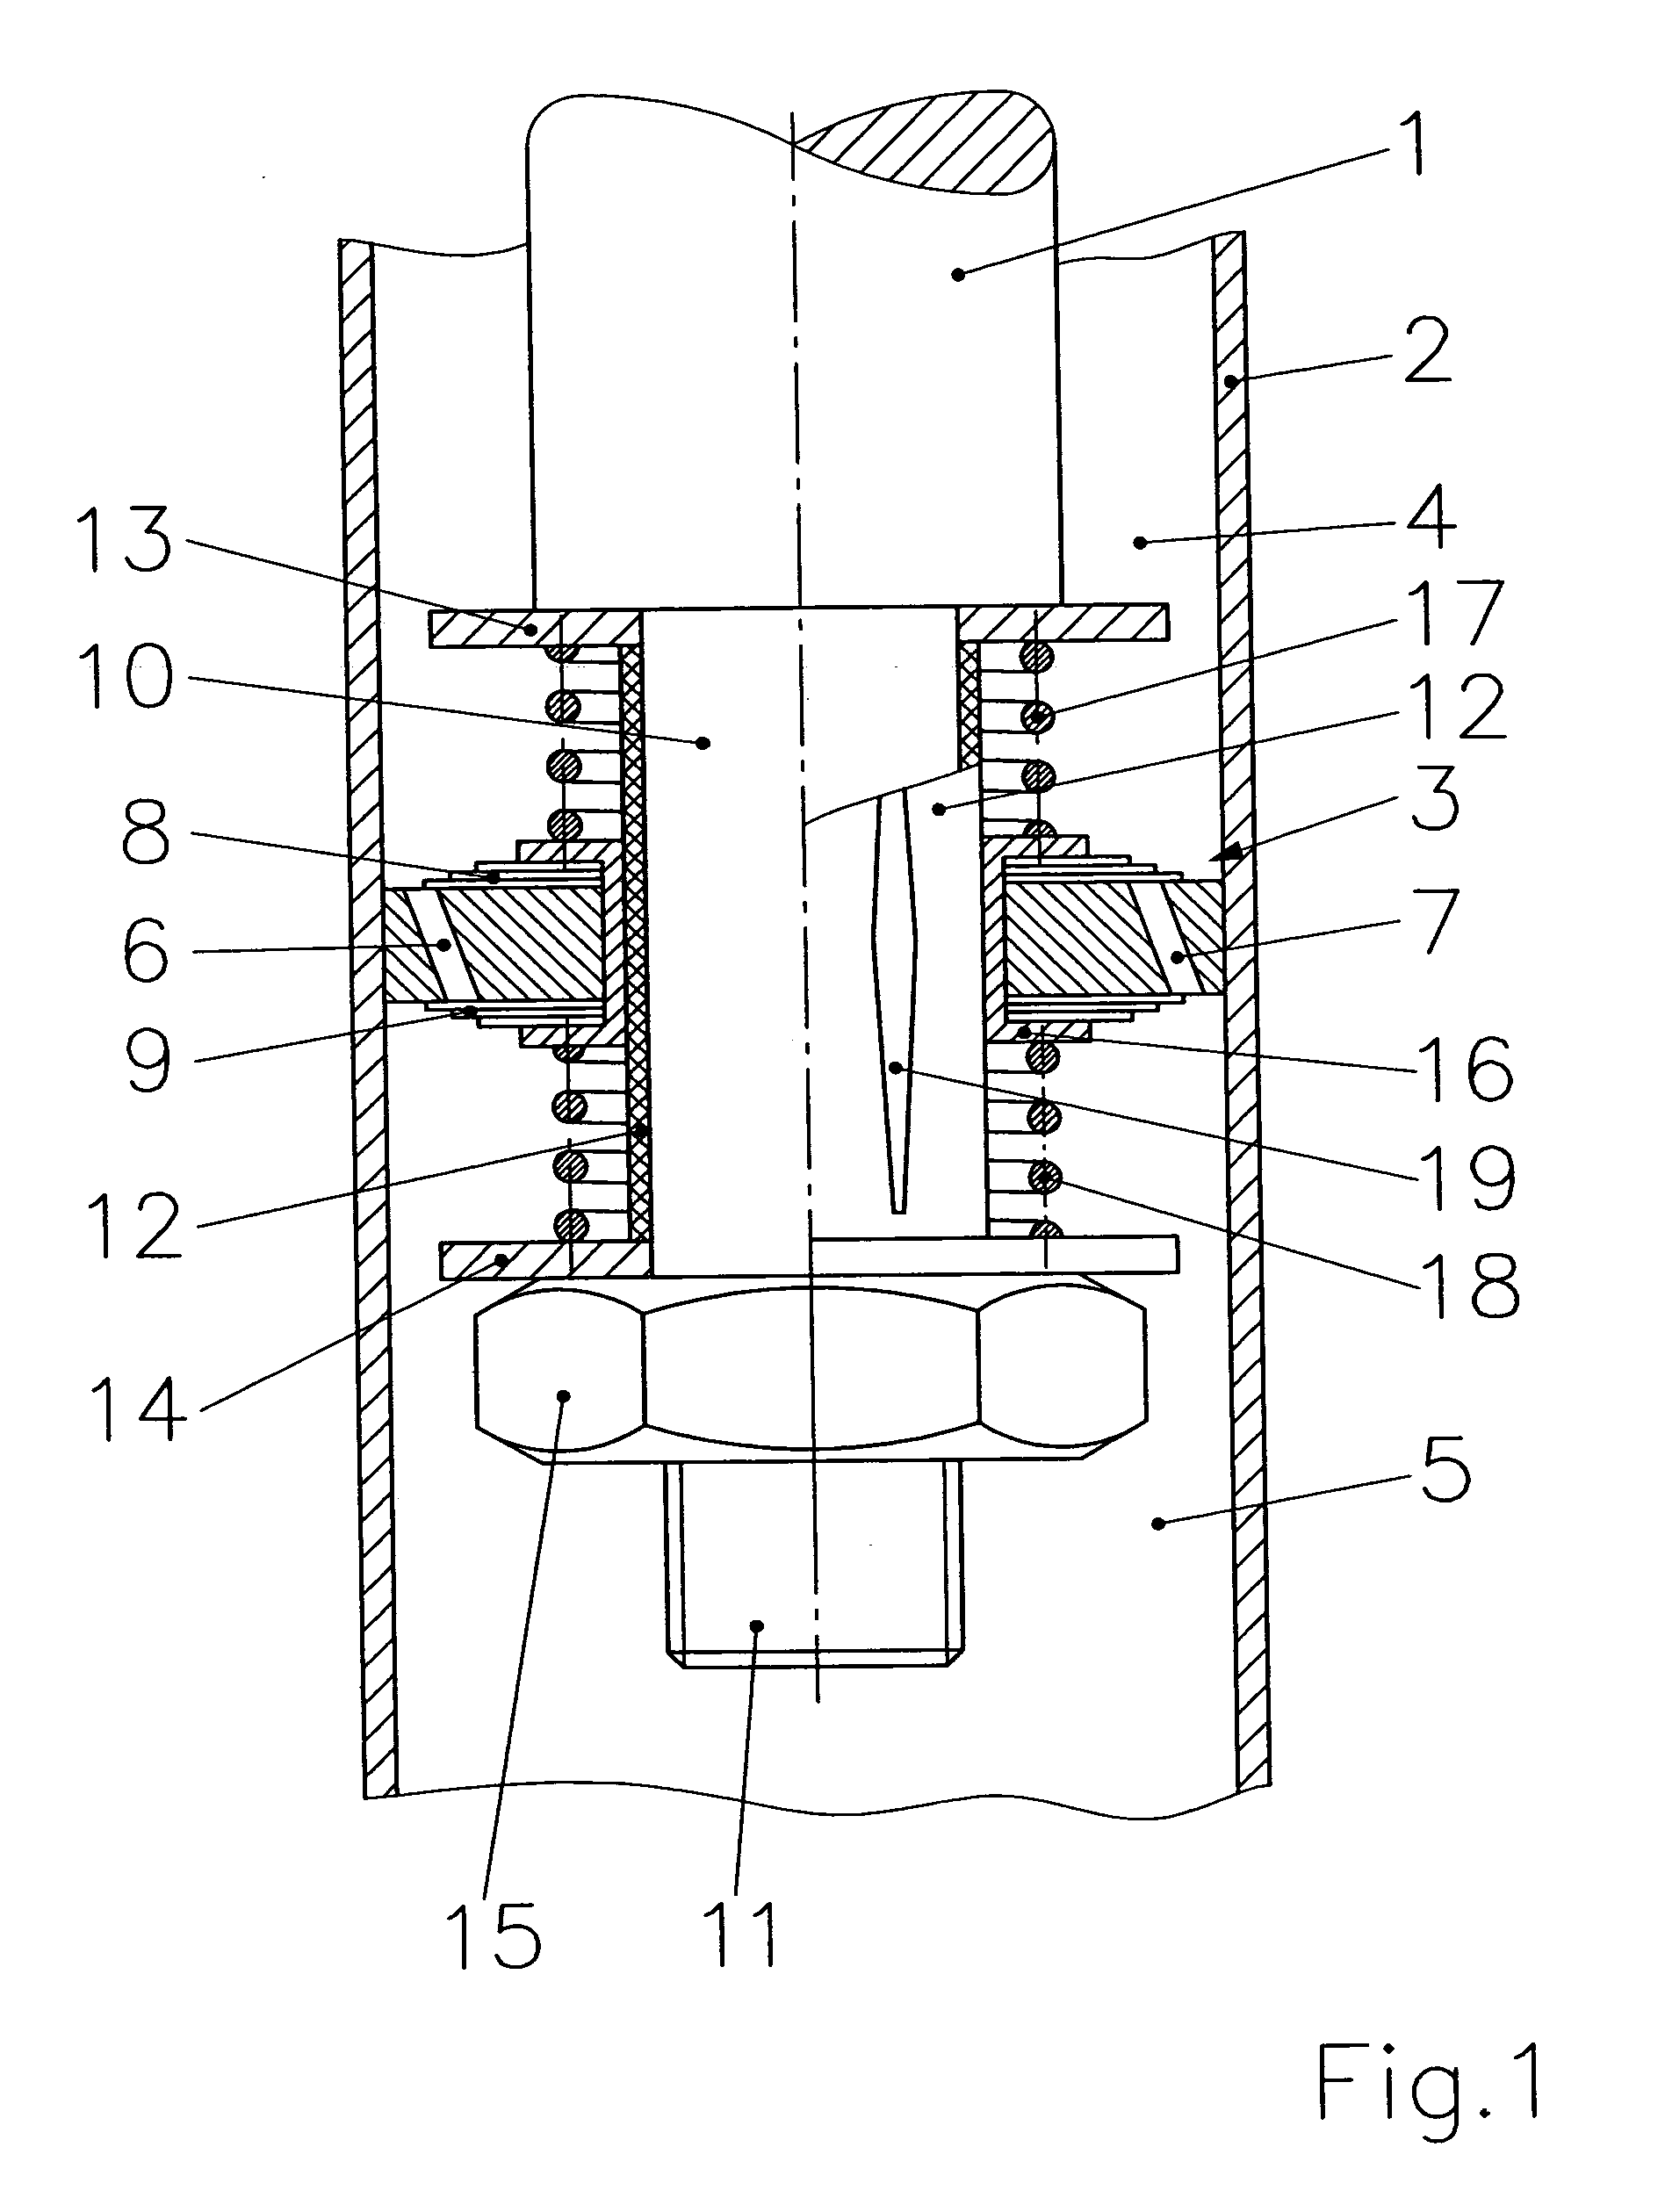 Subassembly for the amplitude-dependent absorption of shock